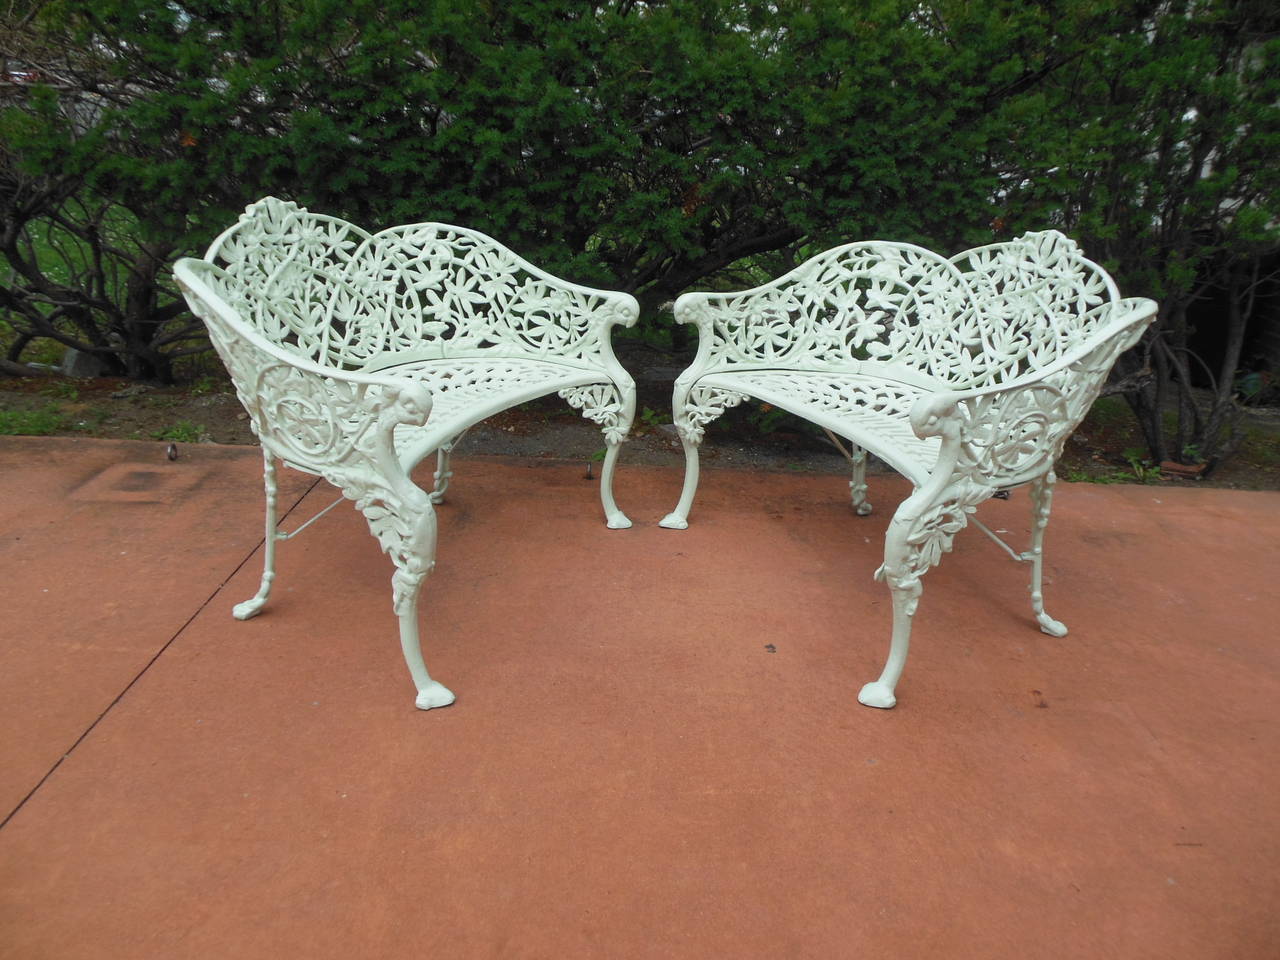 A  Pair of  Cast Iron Benches in the hard to find Passion Flower pattern. The benches in the rococo style, have been been totally restored and painted in a very light sage green. They had no breaks or repairs prior to painting and are still in